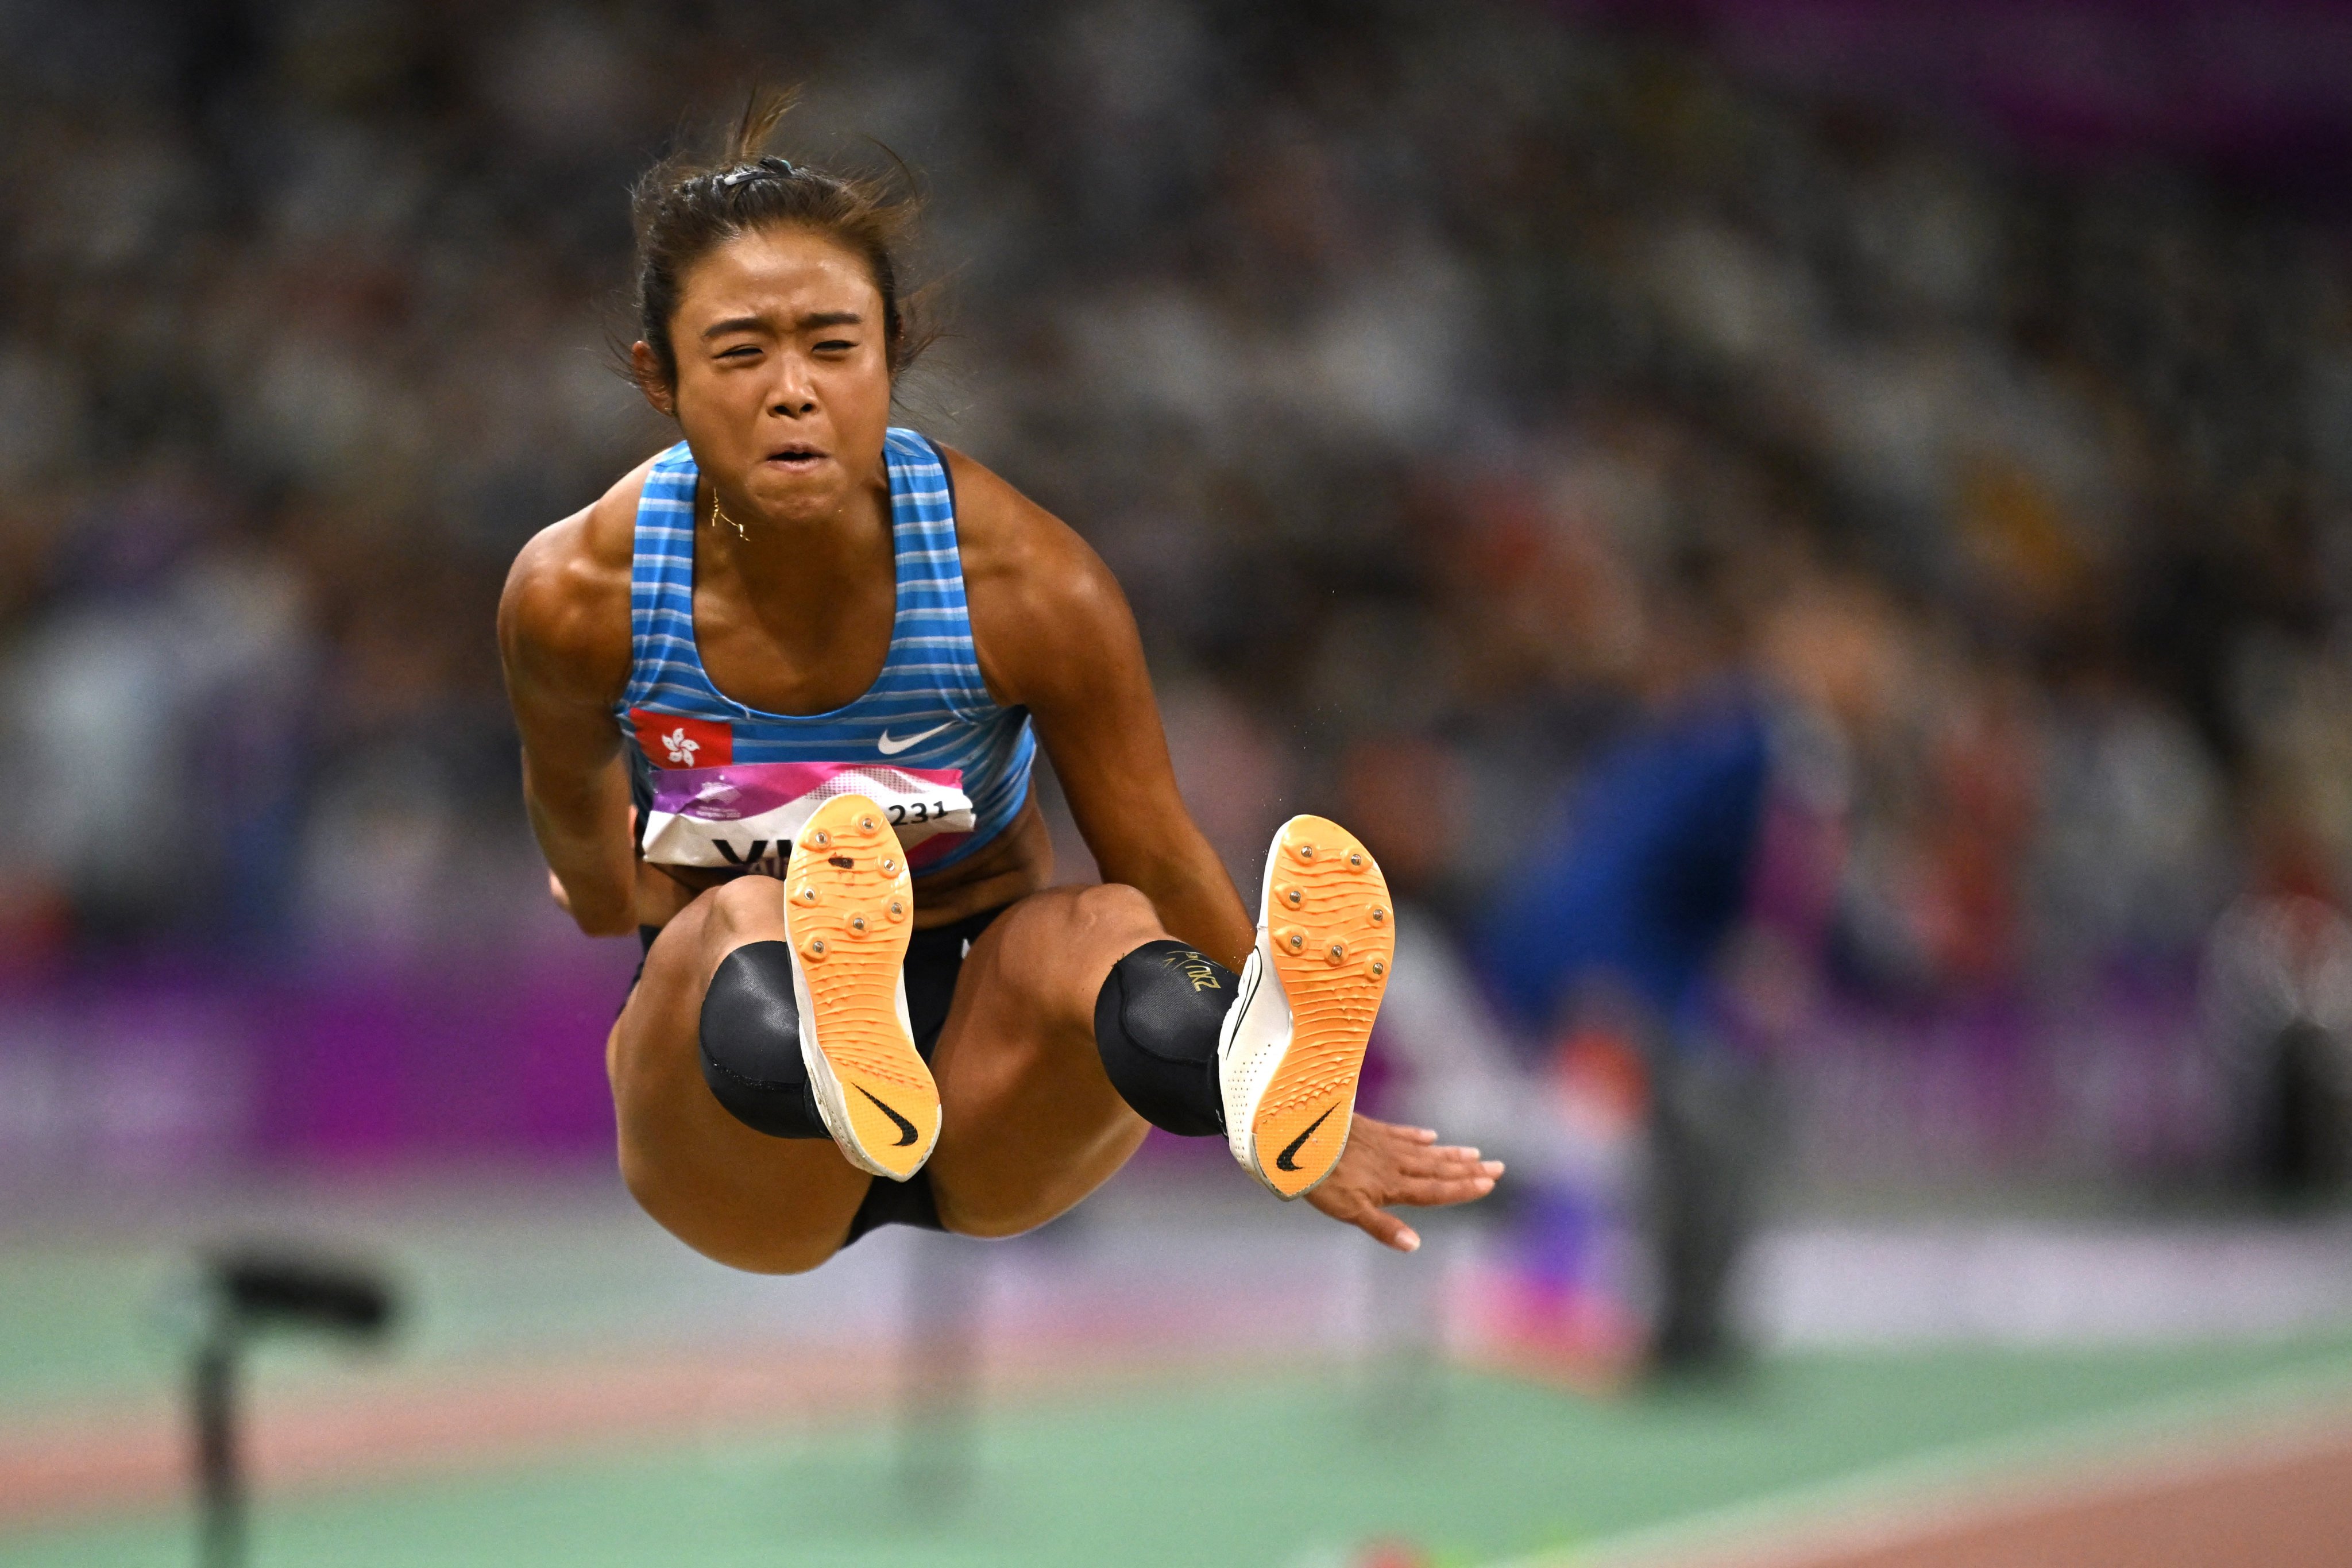 Hong Kong’s Tiffany Yue during the final of the women’s long jump at the Asian Games last year, when she came in third. Photo: Reuters